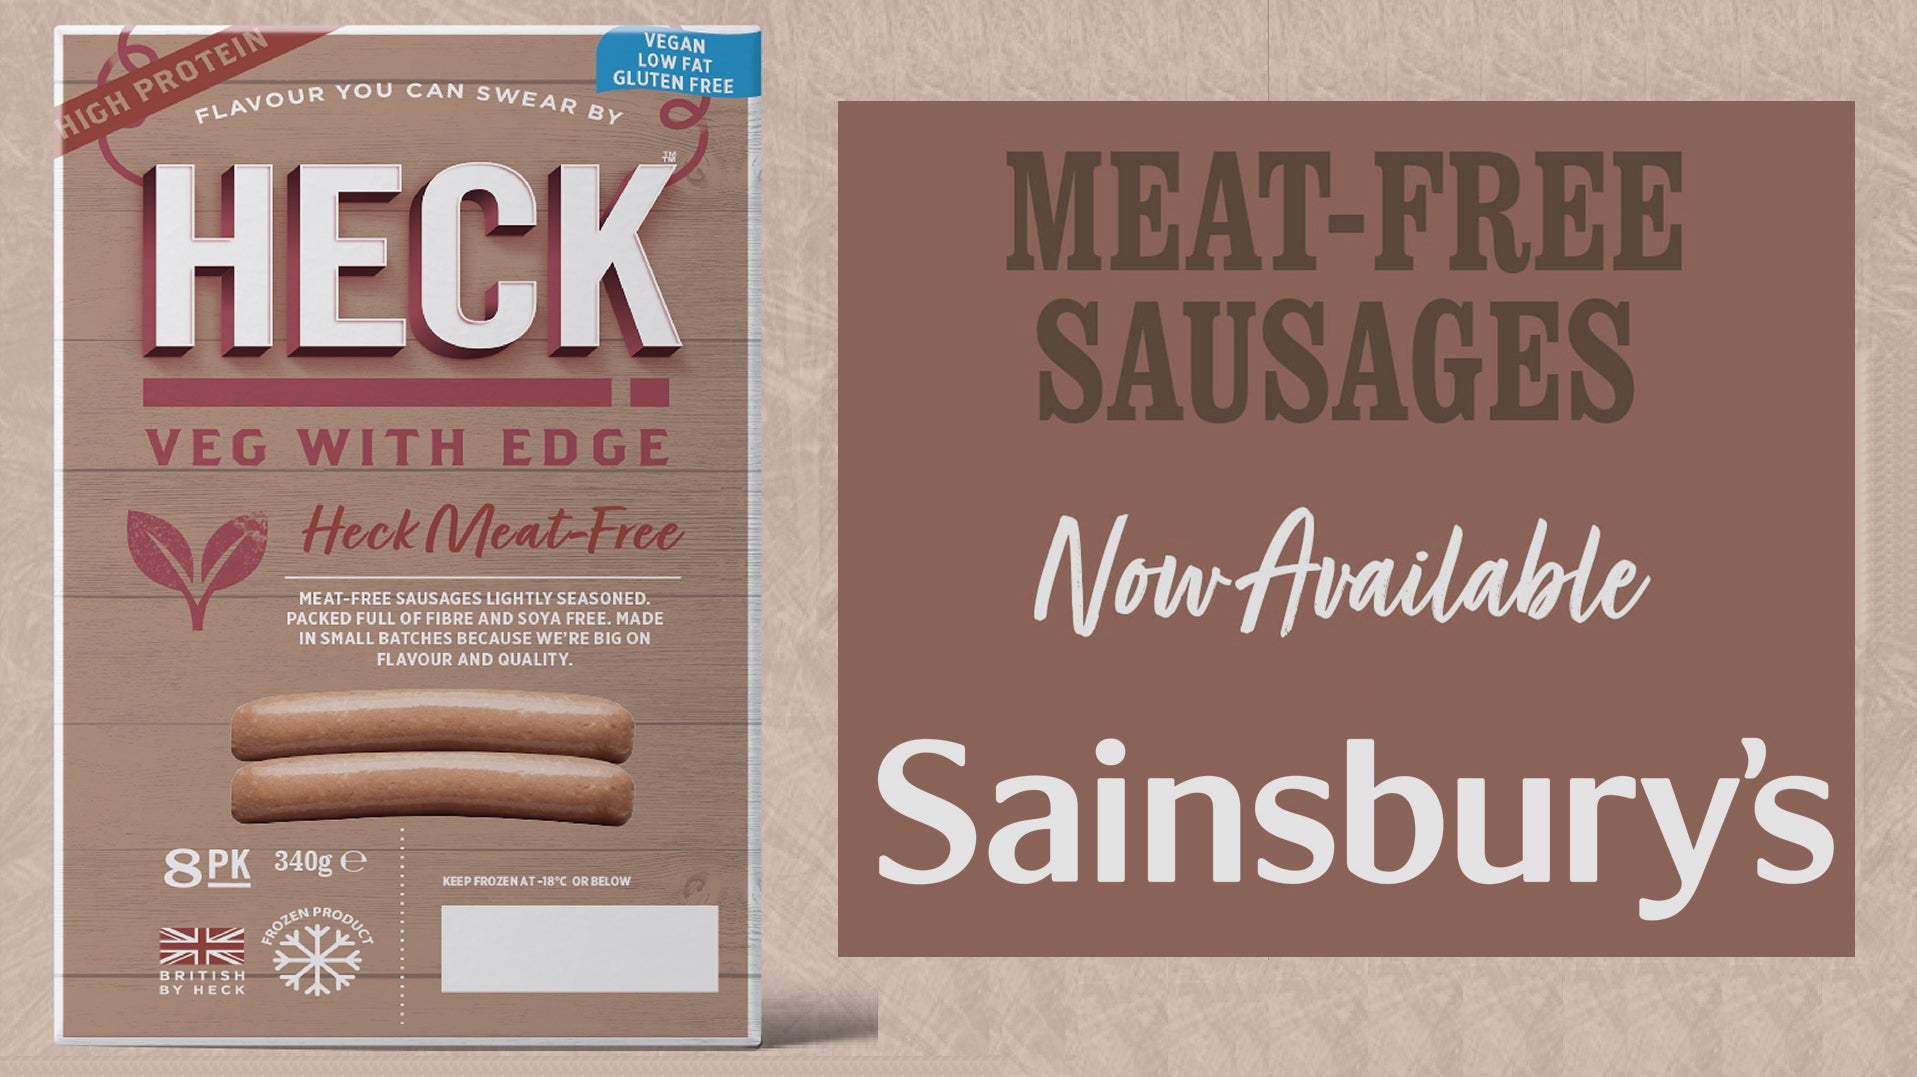 Buy HECK Frozen Meat-Free Sausages In Sainsburys Now!